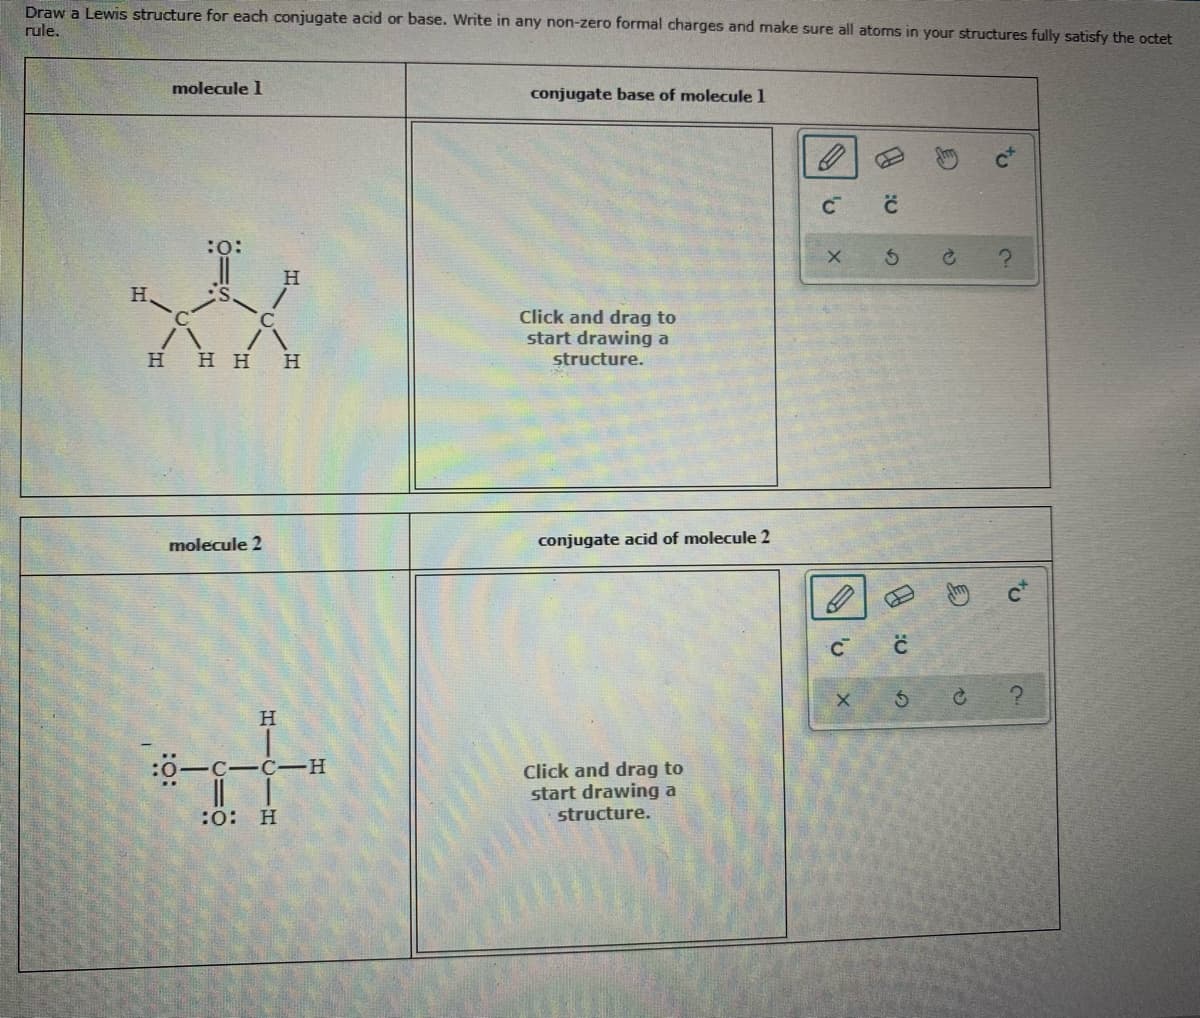 Draw a Lewis structure for each conjugate acid or base. Write in any non-zero formal charges and make sure all atoms in your structures fully satisfy the octet
rule.
molecule 1
conjugate base of molecule 1
:o:
H.
Click and drag to
start drawing a
H HH
H
structure.
molecule 2
conjugate acid of molecule 2
:0-C-C-H
I| |
:0: H
Click and drag to
start drawing a
structure.
to
to
HIC
